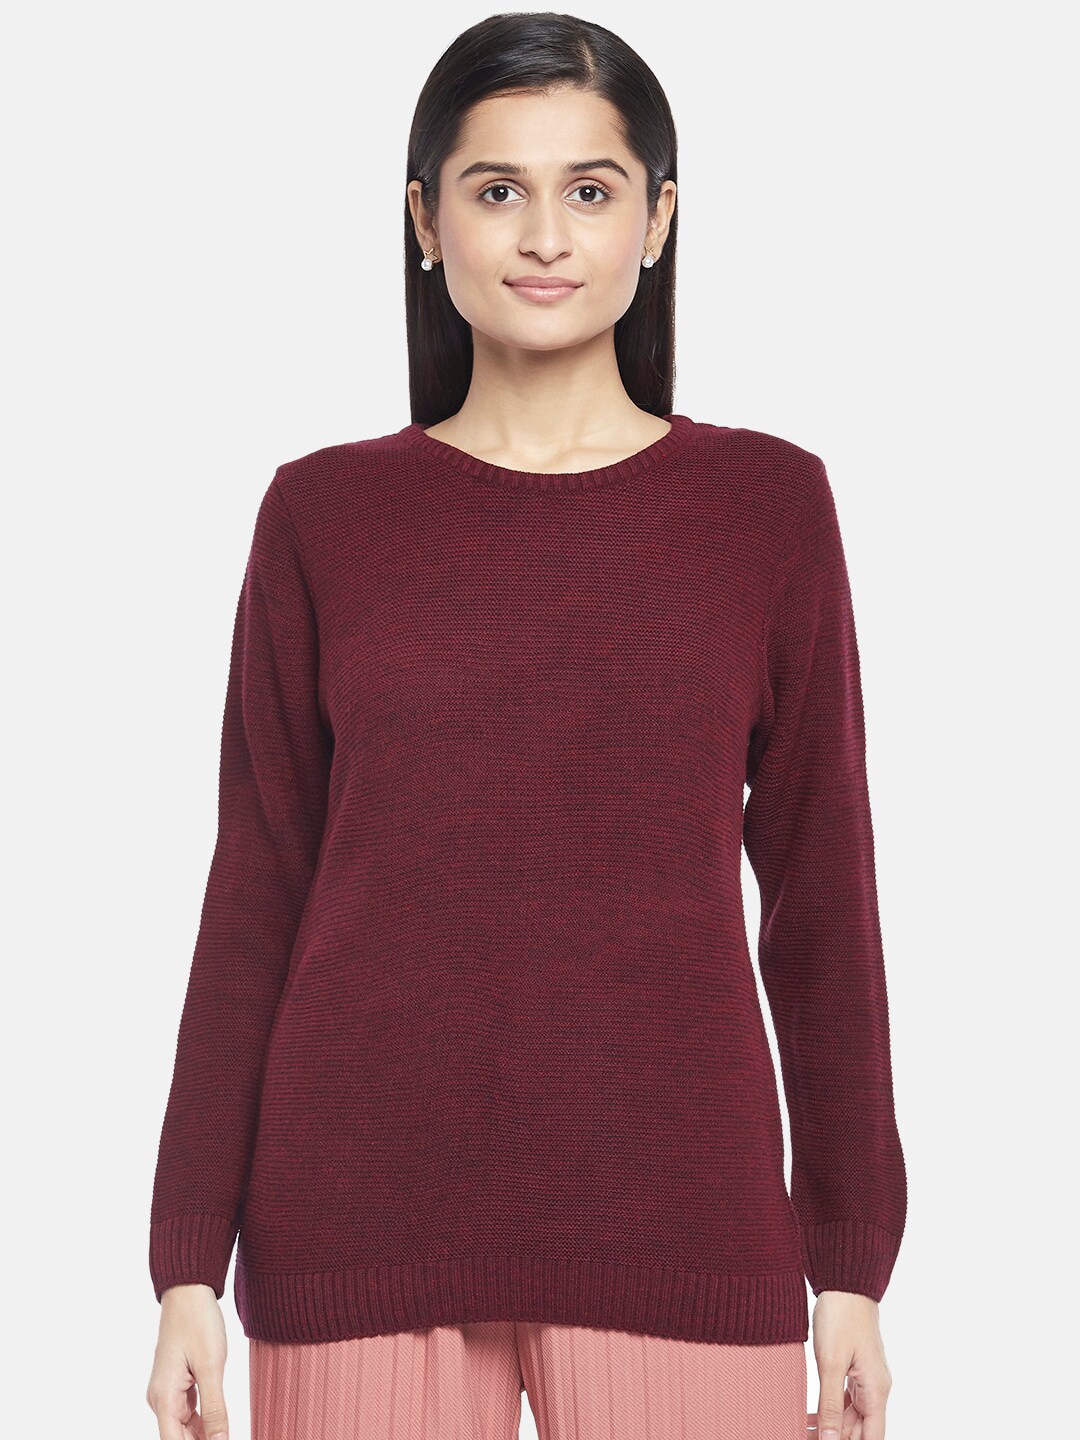 Honey by Pantaloons Women Red Pullover Longline Acrylic Sweater Price in India